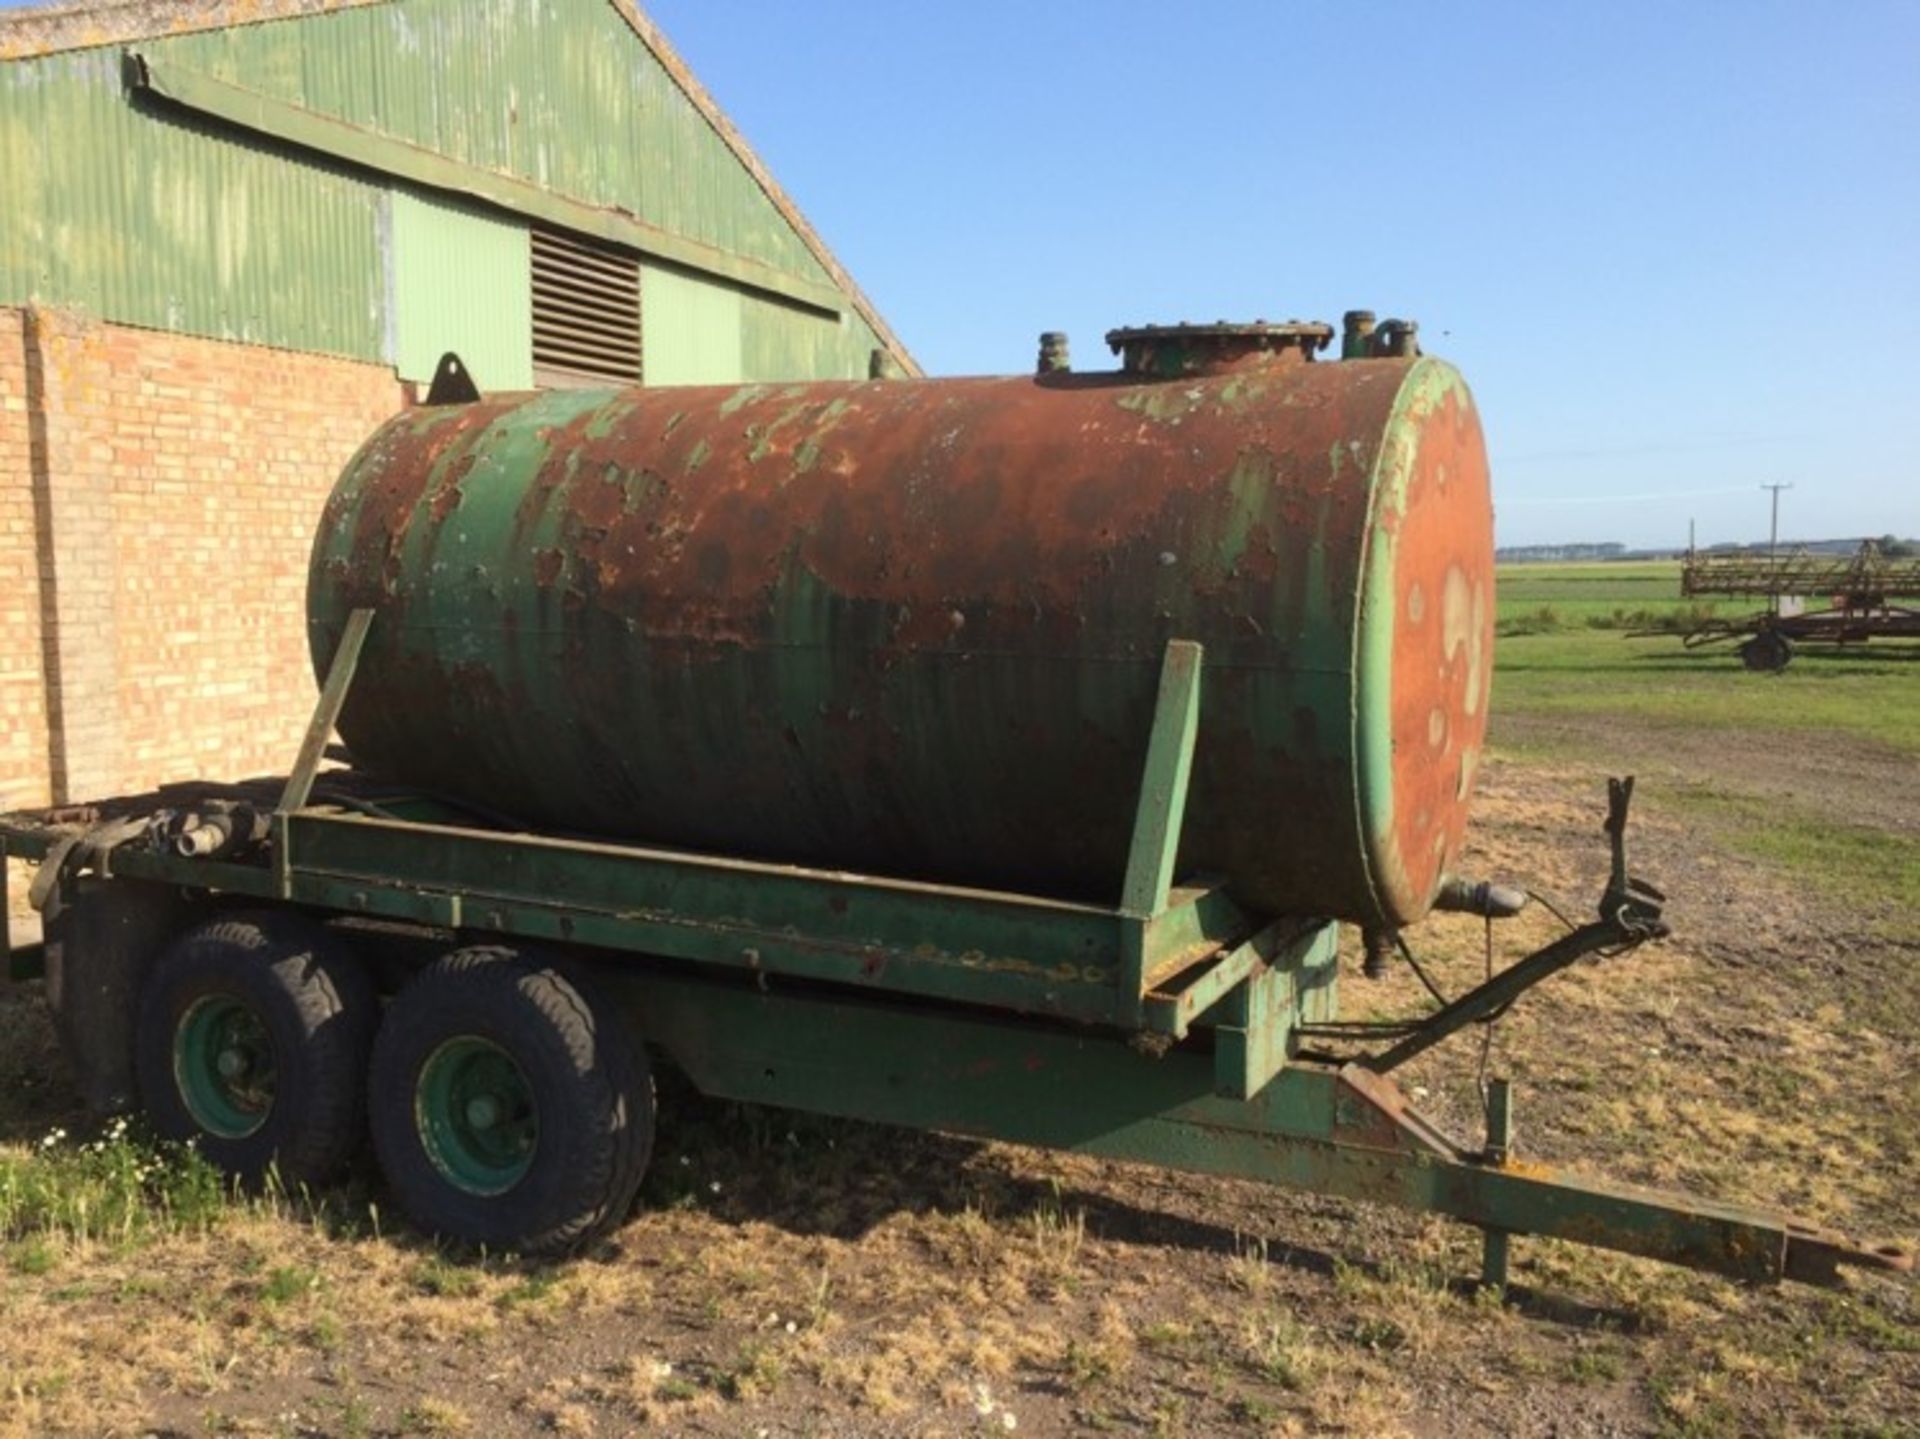 Trailed water bowser mounted on wooden bed trailer. Location Brandon, Suffolk